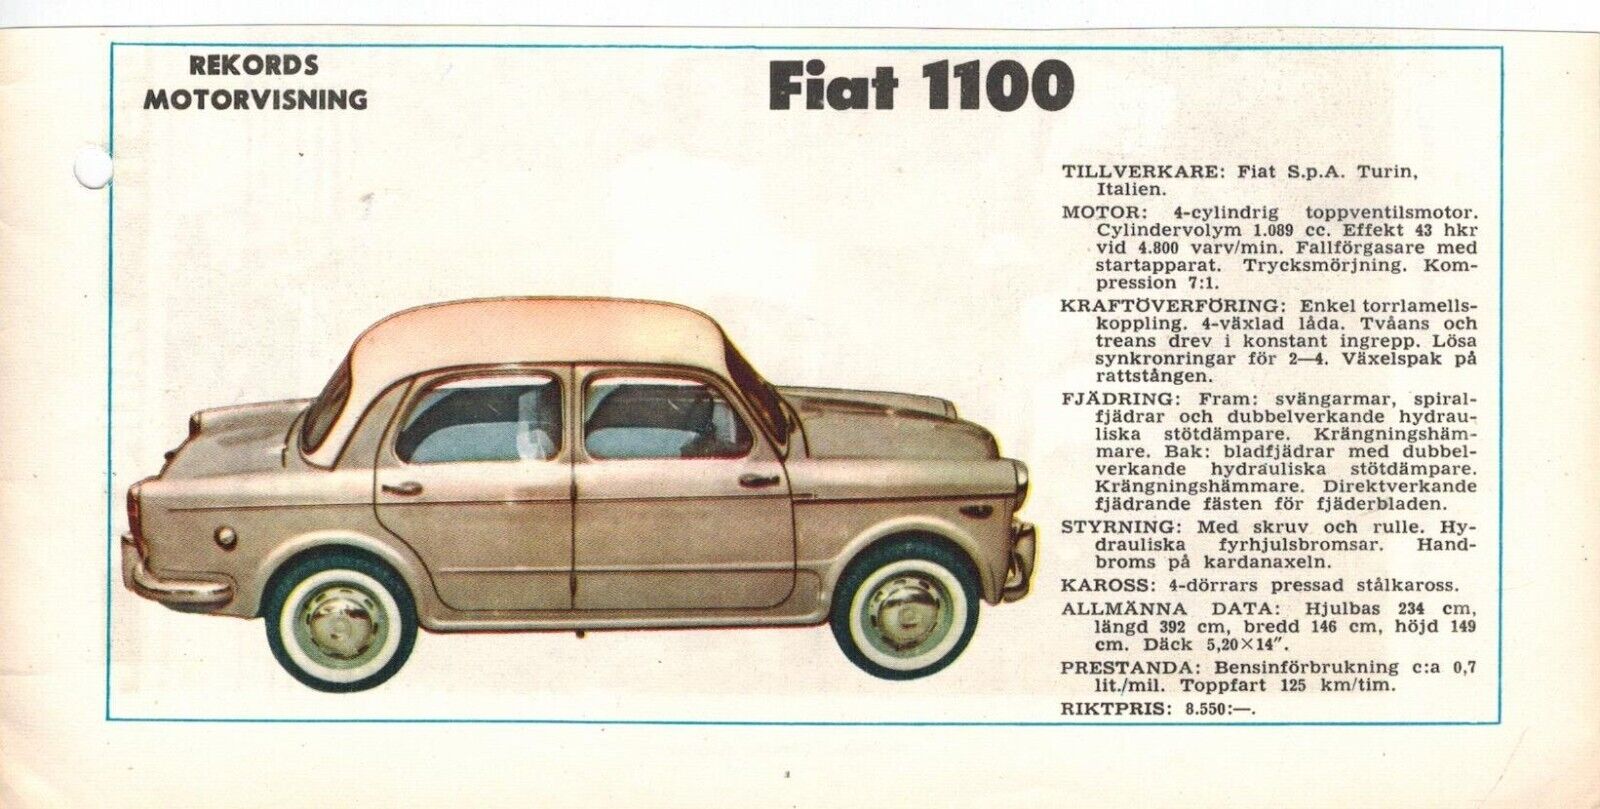 Fiat 1100 Car Collector\'s Insert Series from 1959